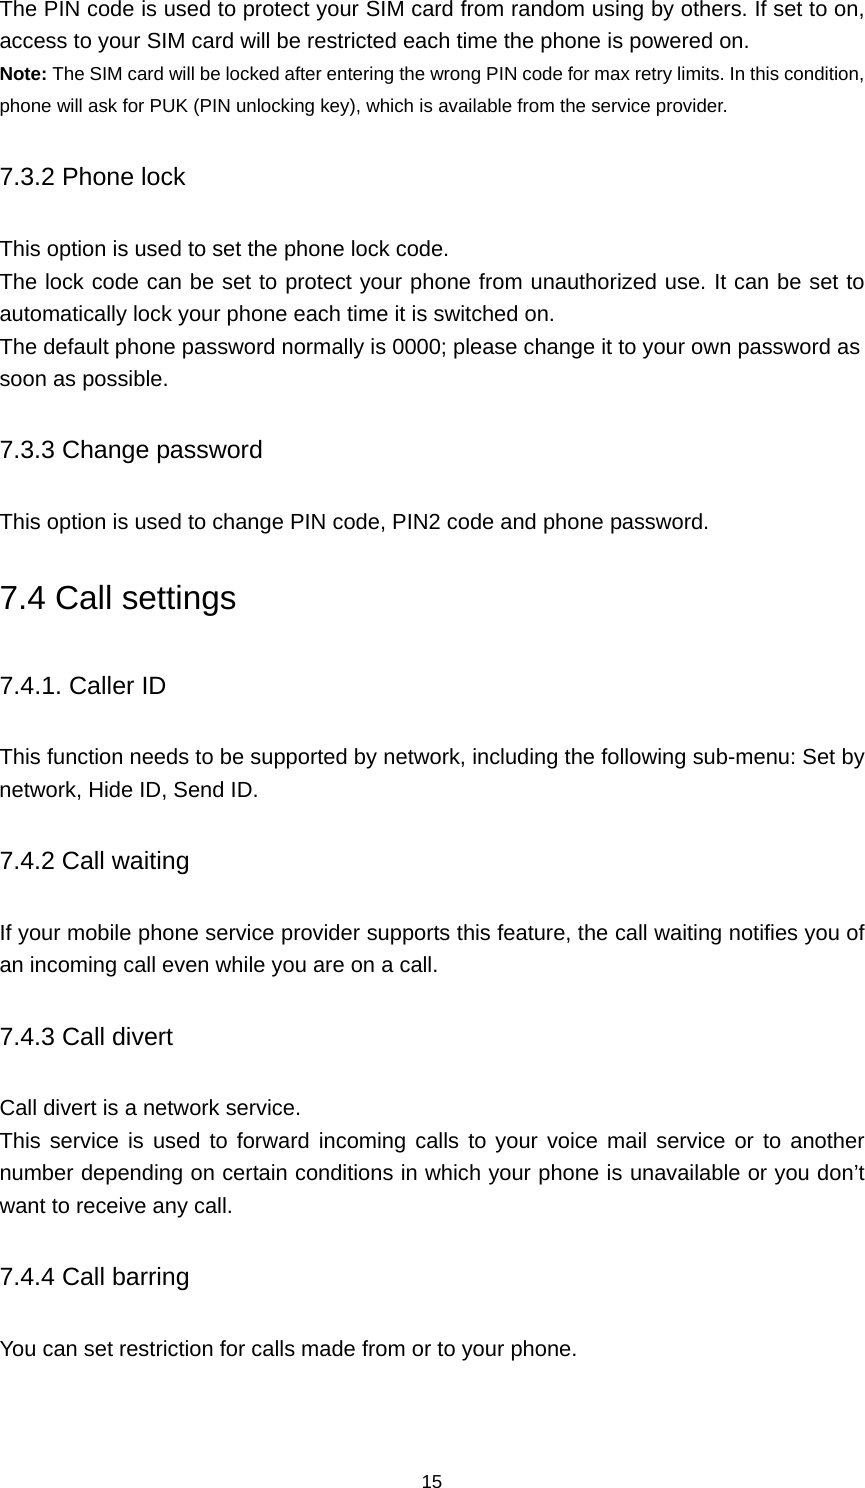 15 The PIN code is used to protect your SIM card from random using by others. If set to on, access to your SIM card will be restricted each time the phone is powered on. Note: The SIM card will be locked after entering the wrong PIN code for max retry limits. In this condition, phone will ask for PUK (PIN unlocking key), which is available from the service provider. 7.3.2 Phone lock This option is used to set the phone lock code. The lock code can be set to protect your phone from unauthorized use. It can be set to automatically lock your phone each time it is switched on. The default phone password normally is 0000; please change it to your own password as soon as possible. 7.3.3 Change password This option is used to change PIN code, PIN2 code and phone password. 7.4 Call settings 7.4.1. Caller ID This function needs to be supported by network, including the following sub-menu: Set by network, Hide ID, Send ID. 7.4.2 Call waiting If your mobile phone service provider supports this feature, the call waiting notifies you of an incoming call even while you are on a call.   7.4.3 Call divert Call divert is a network service. This service is used to forward incoming calls to your voice mail service or to another number depending on certain conditions in which your phone is unavailable or you don’t want to receive any call.   7.4.4 Call barring You can set restriction for calls made from or to your phone. 